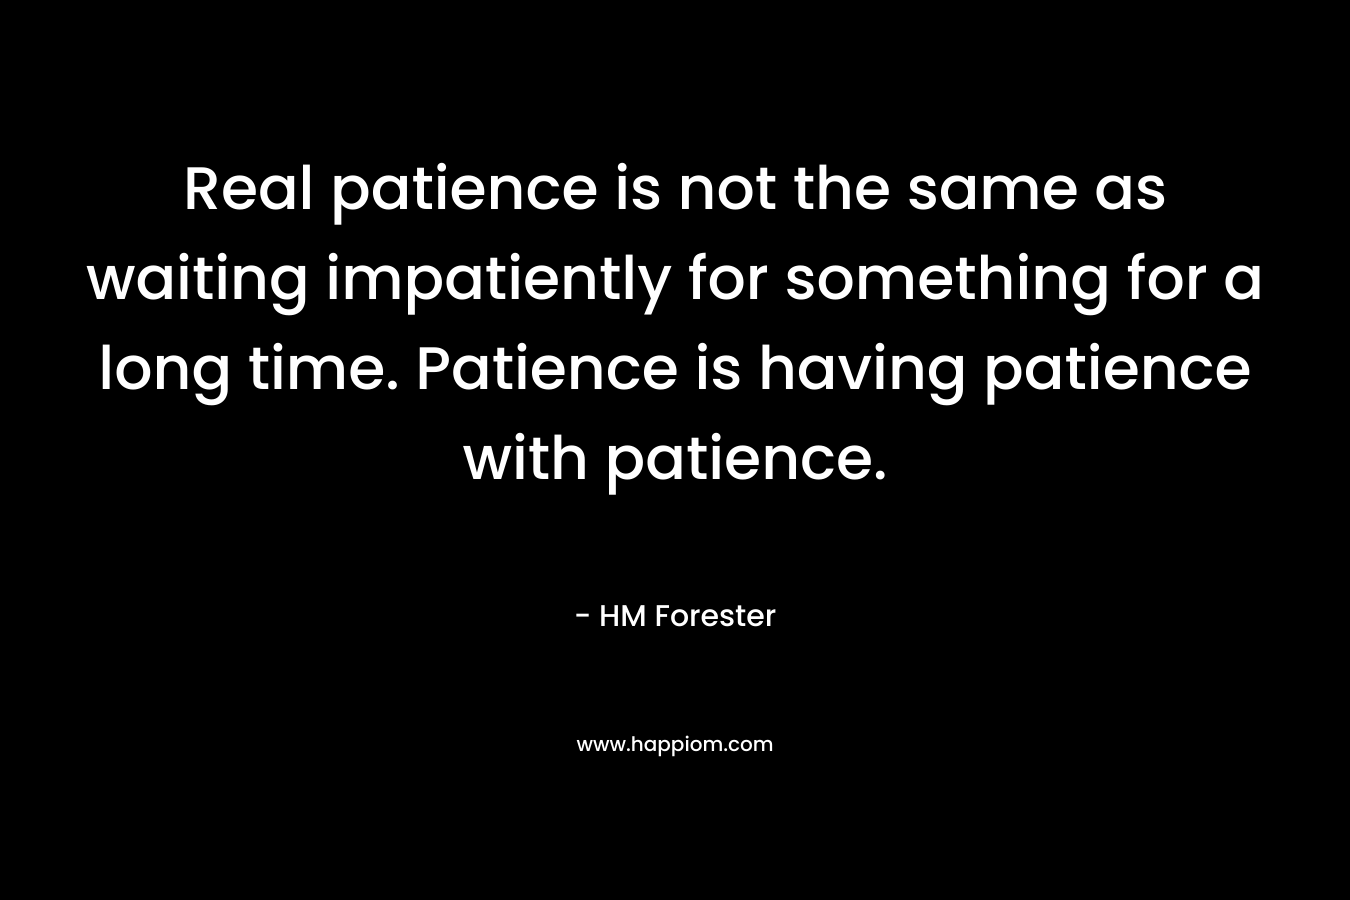 Real patience is not the same as waiting impatiently for something for a long time. Patience is having patience with patience. – HM Forester